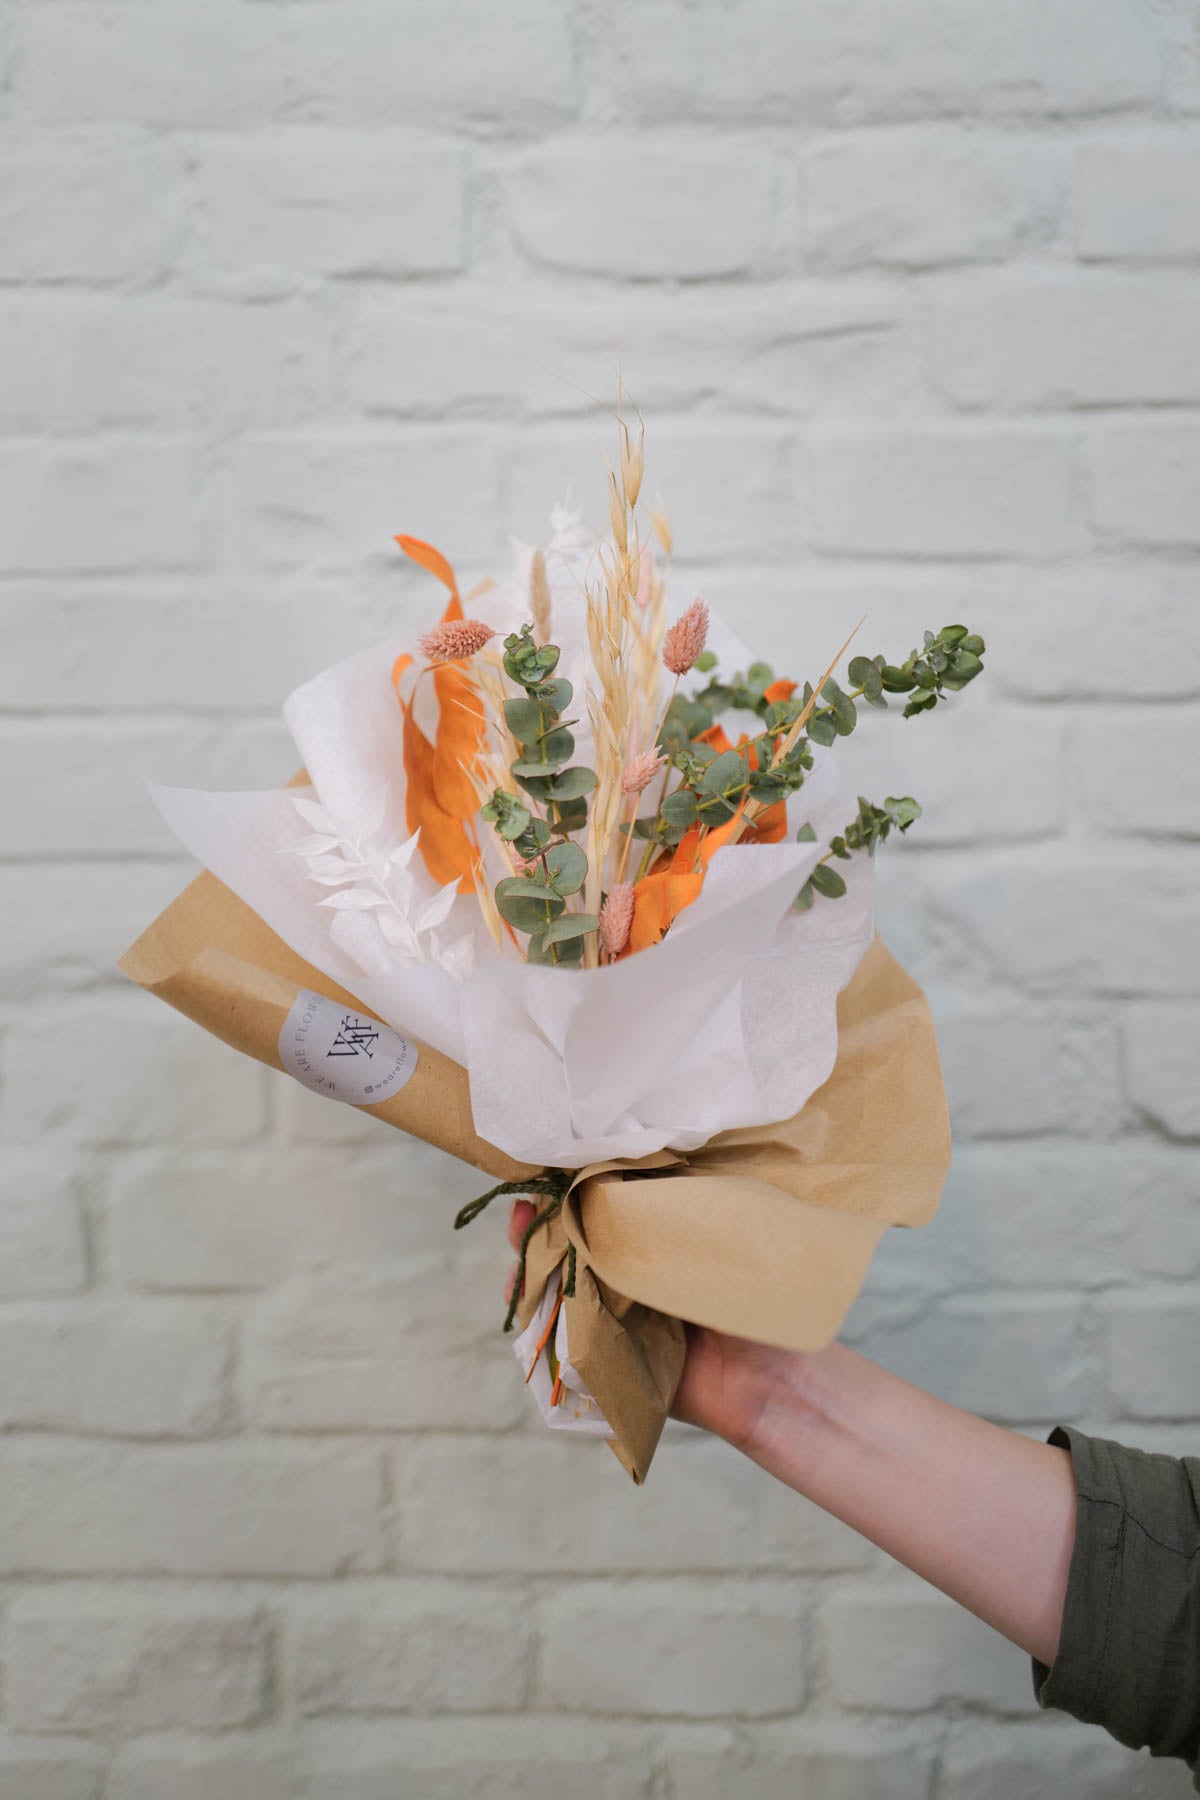 Viva Small Dried Flower Bouquet